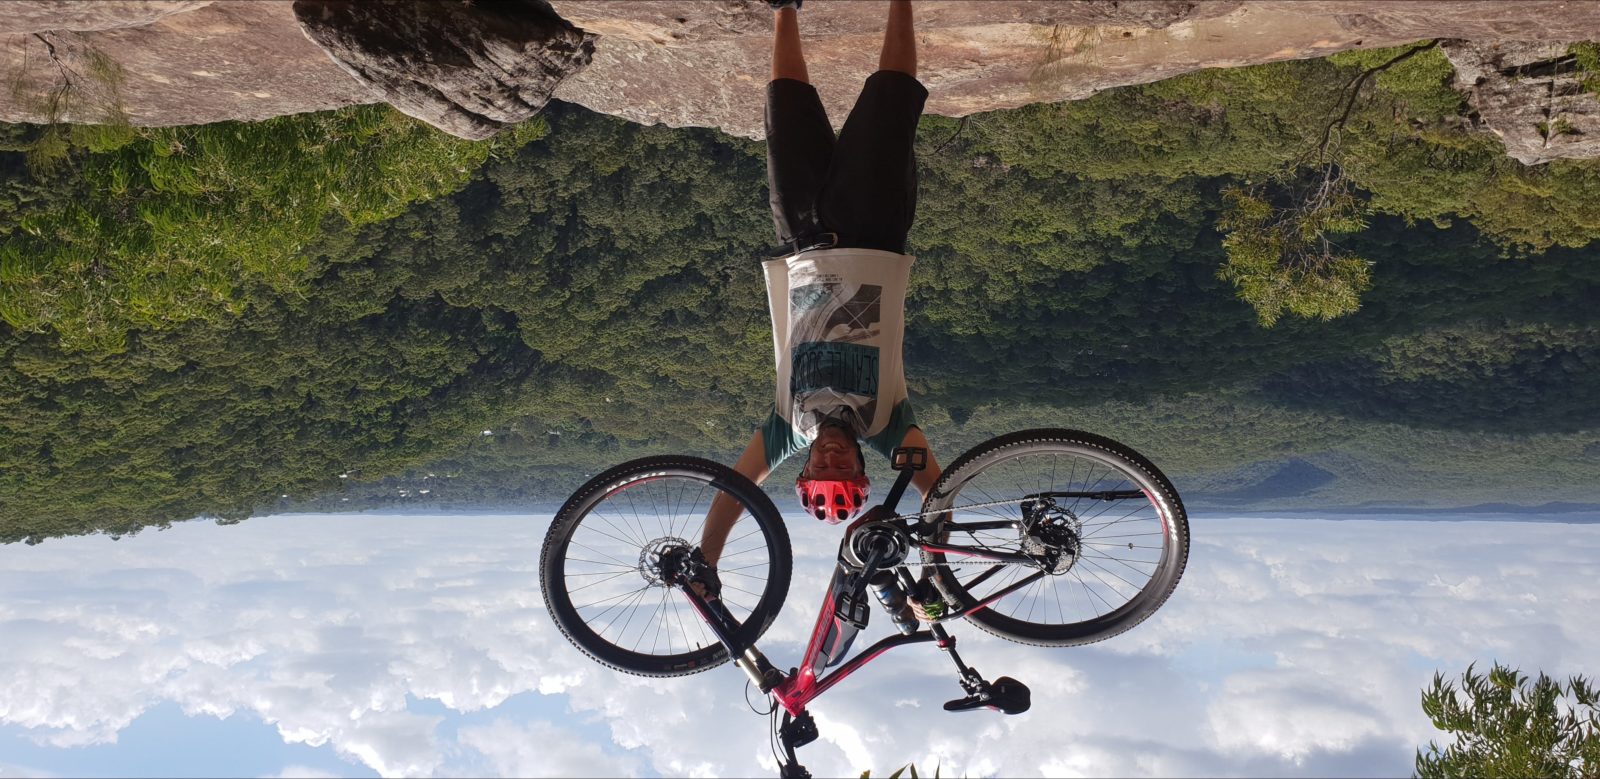 e-bike tour rider with bike held high over breathtaking view